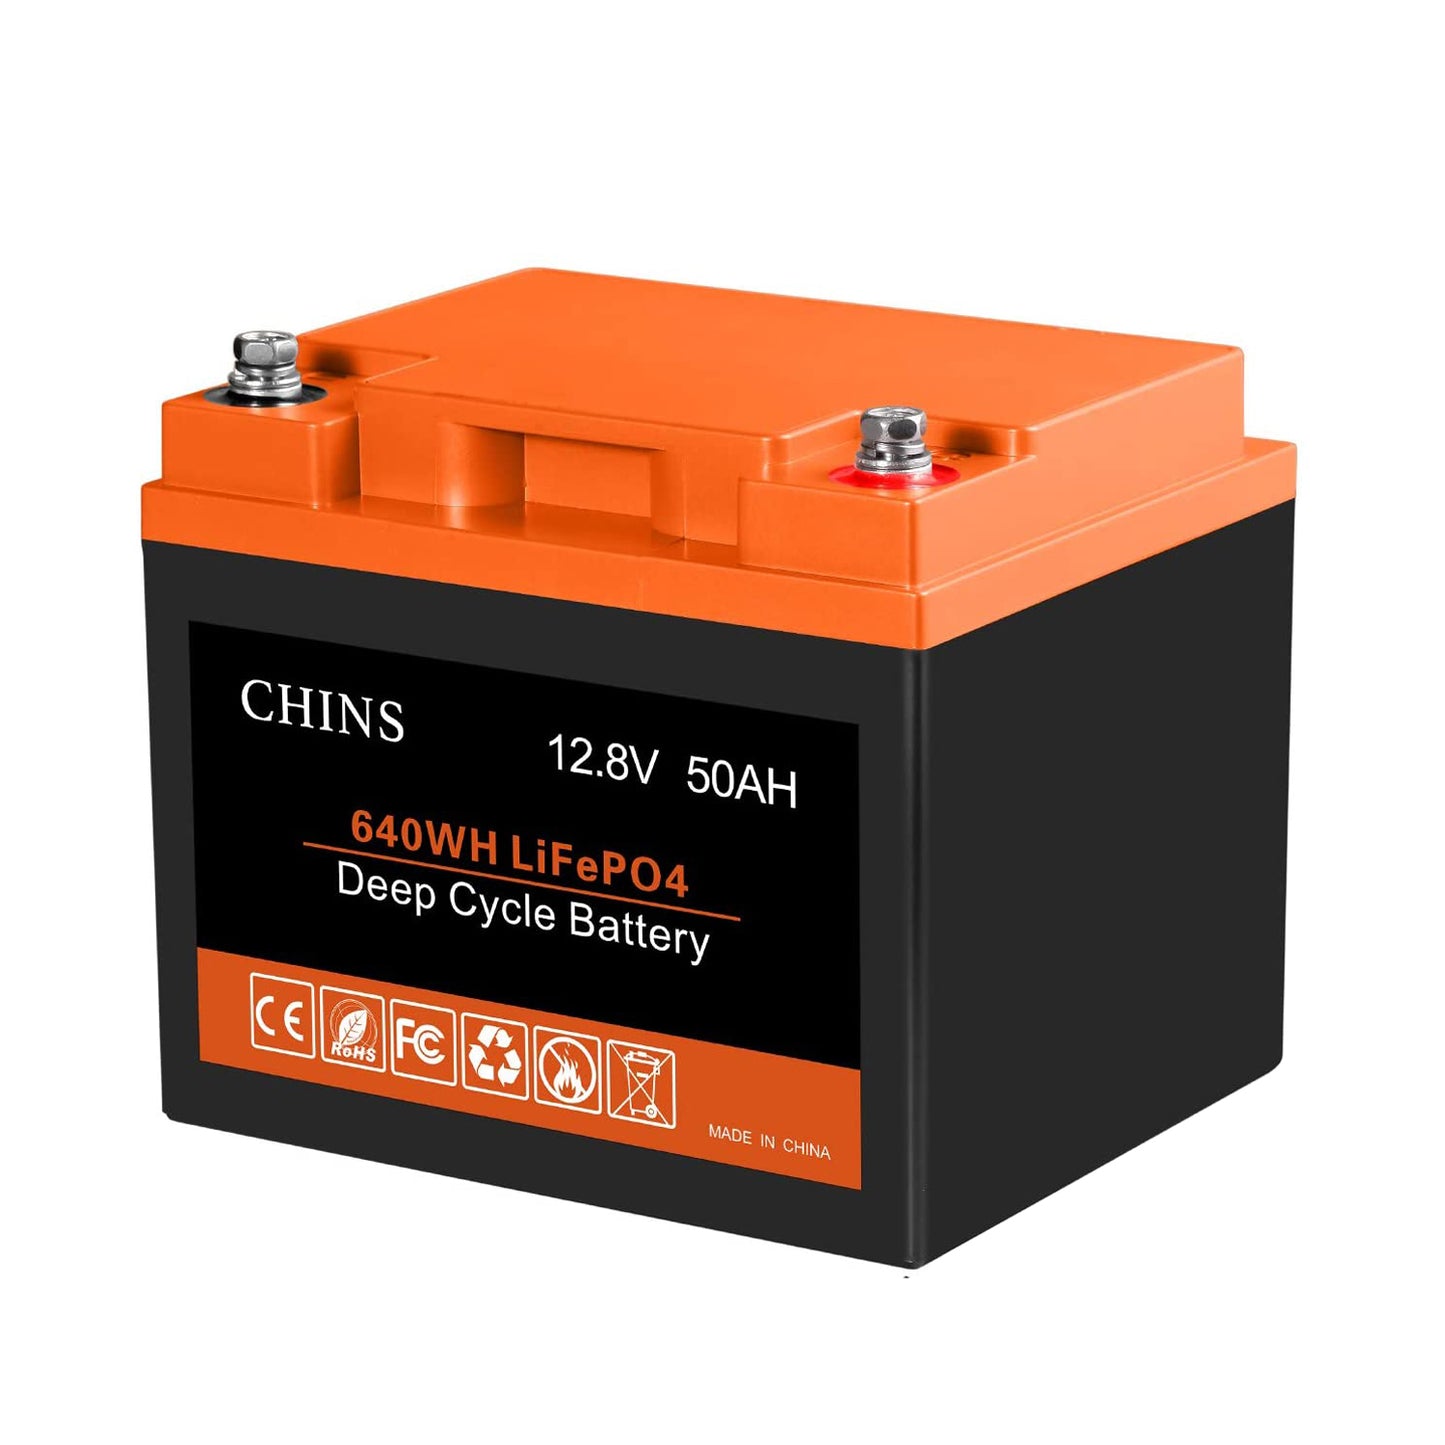 CHINS 12V 50AH LiFePO4 Lithium Battery - Built-in 50A BMS, Perfect for Replacing Most of Backup Power, Home Energy Storage and Off-Grid etc.